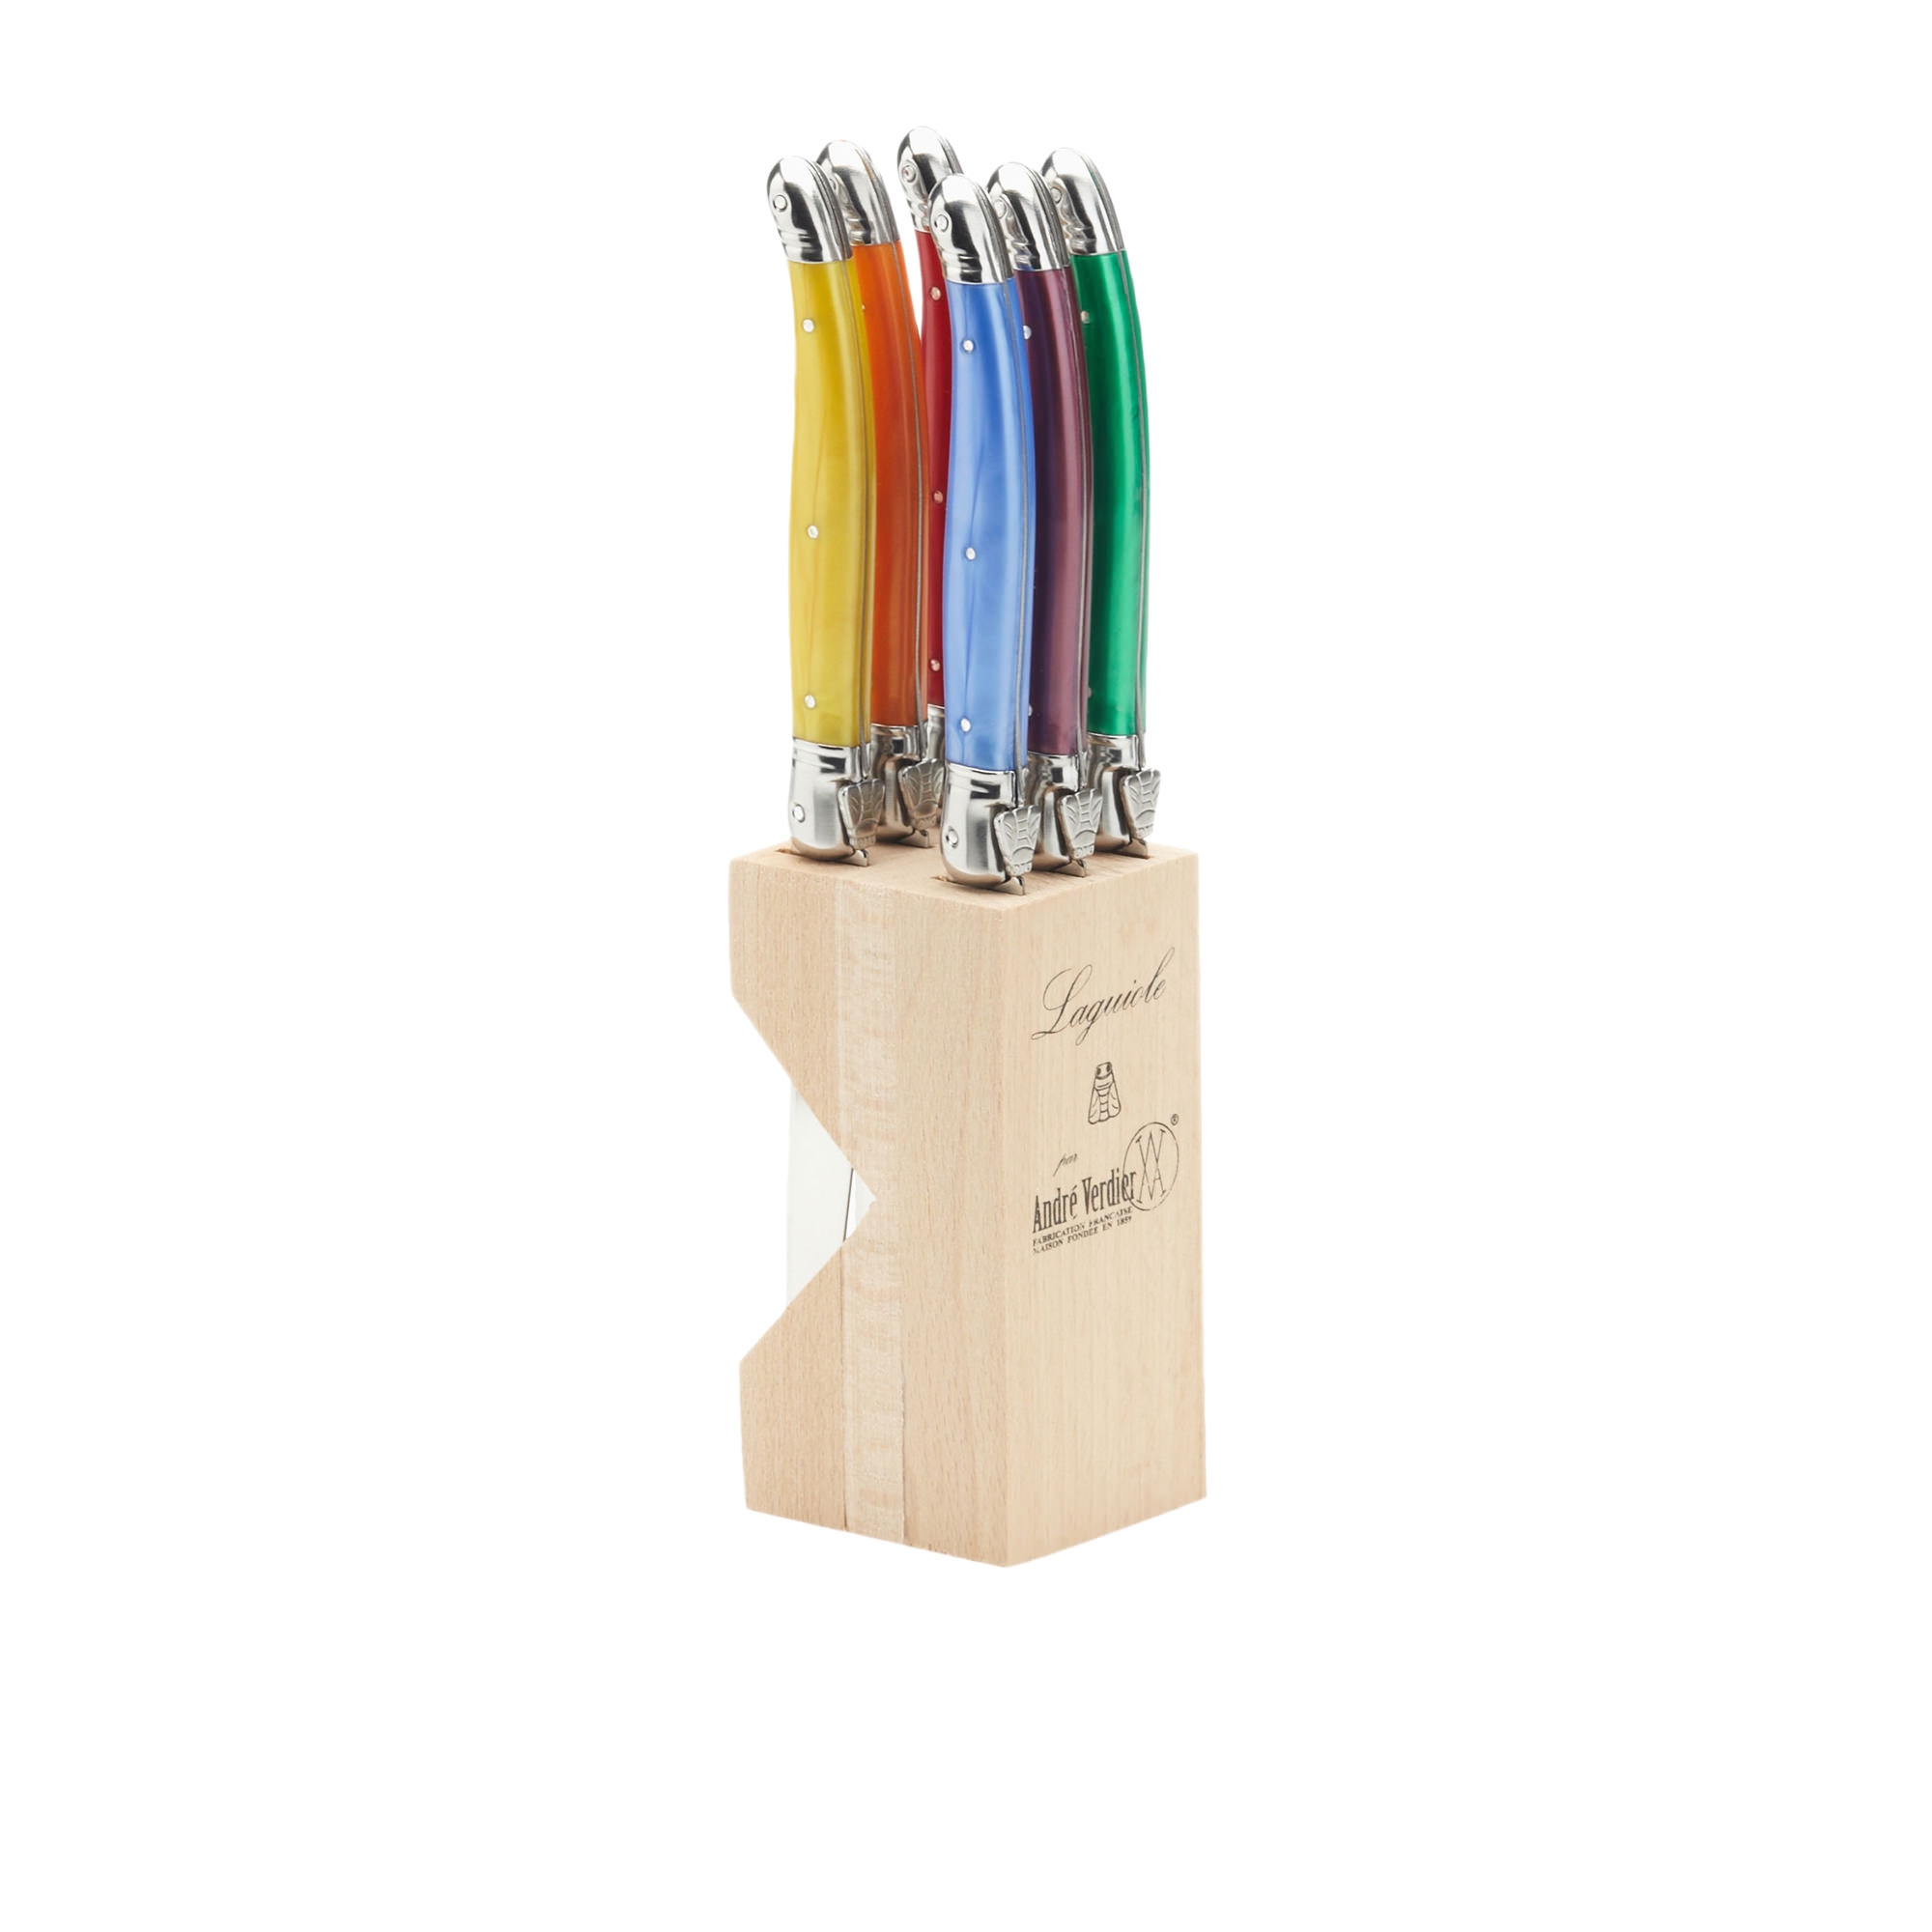 Laguiole by Andre Verdier Debutant 7pc Serrated Knife Block Set Mixed Image 1